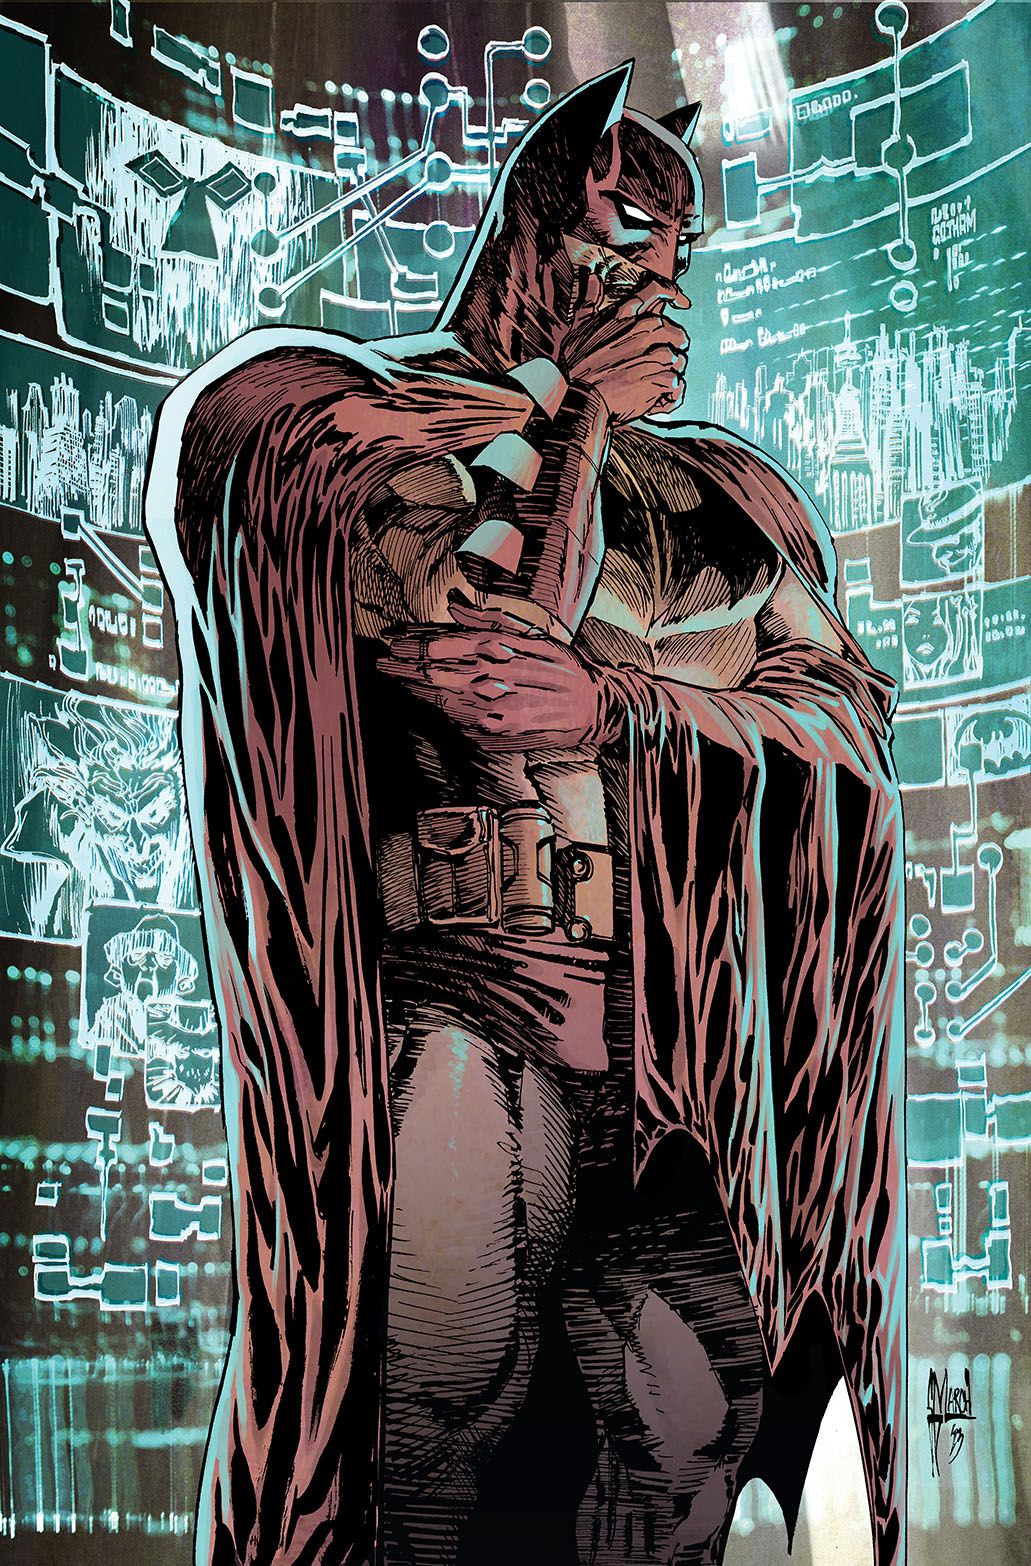 Detective Comics 1087 Open to Order (March)